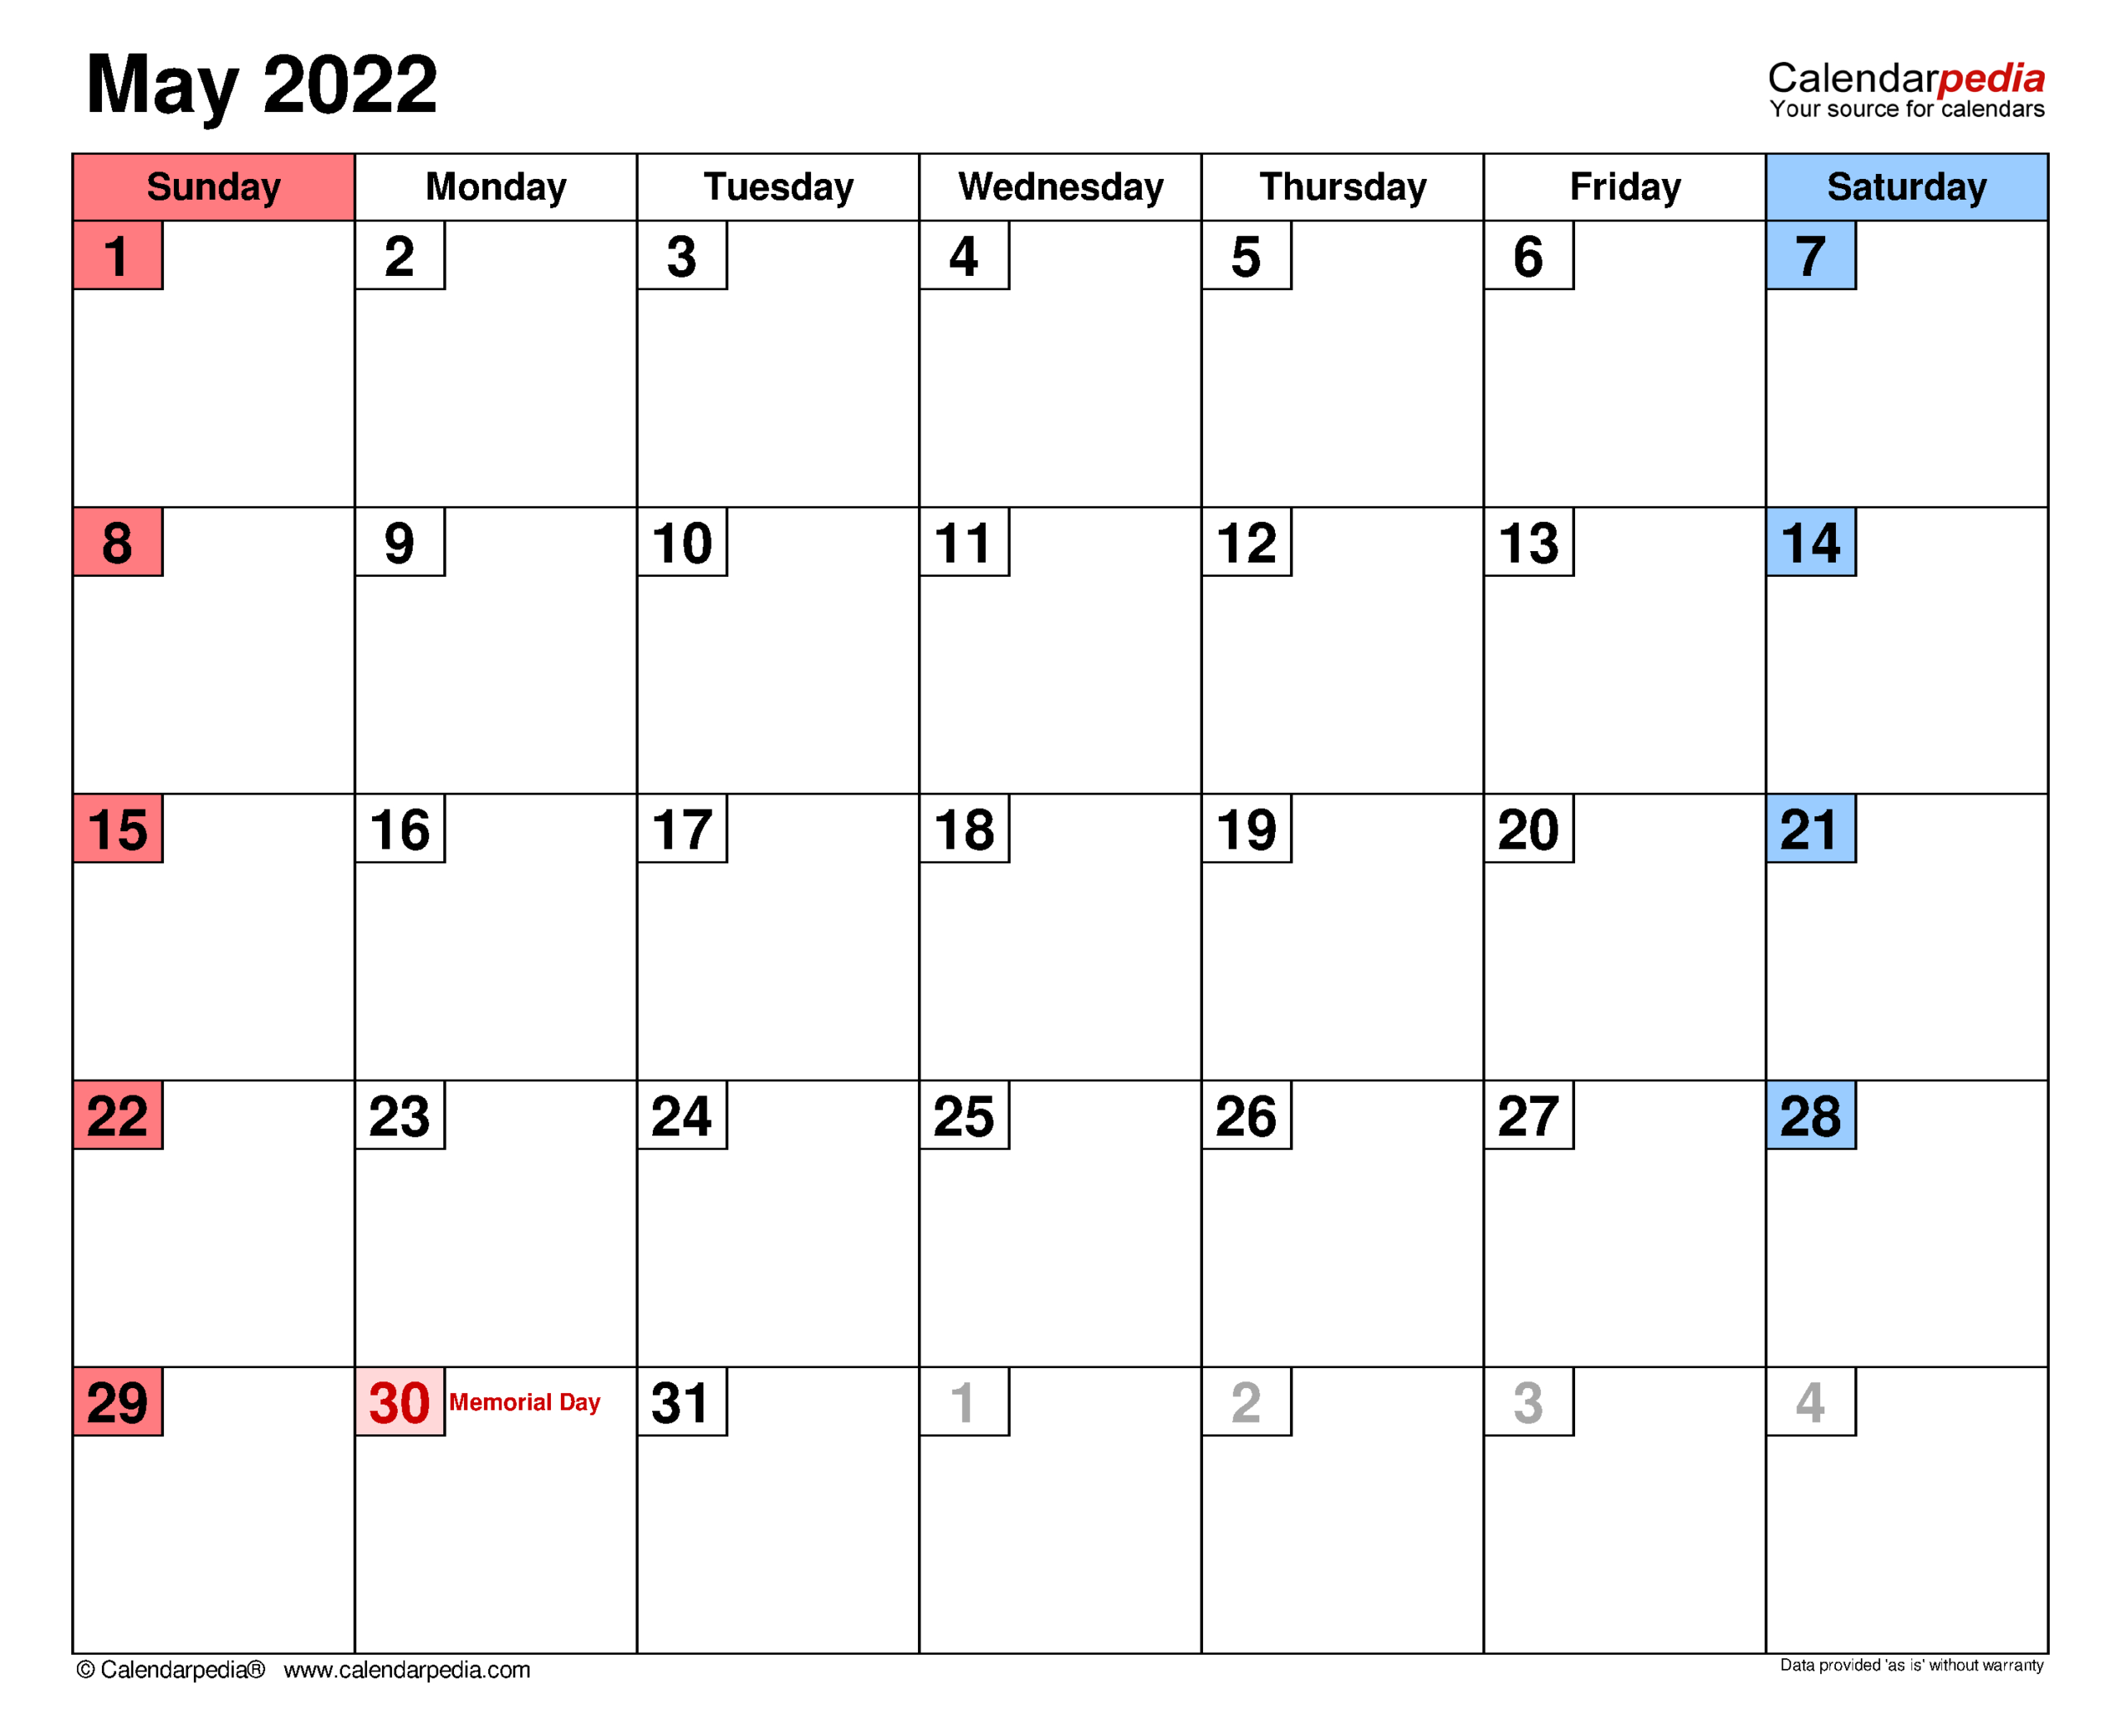 May 2022 Calendar | Templates For Word, Excel And Pdf intended for Blank 2022 Calendar Printable Free Pdf